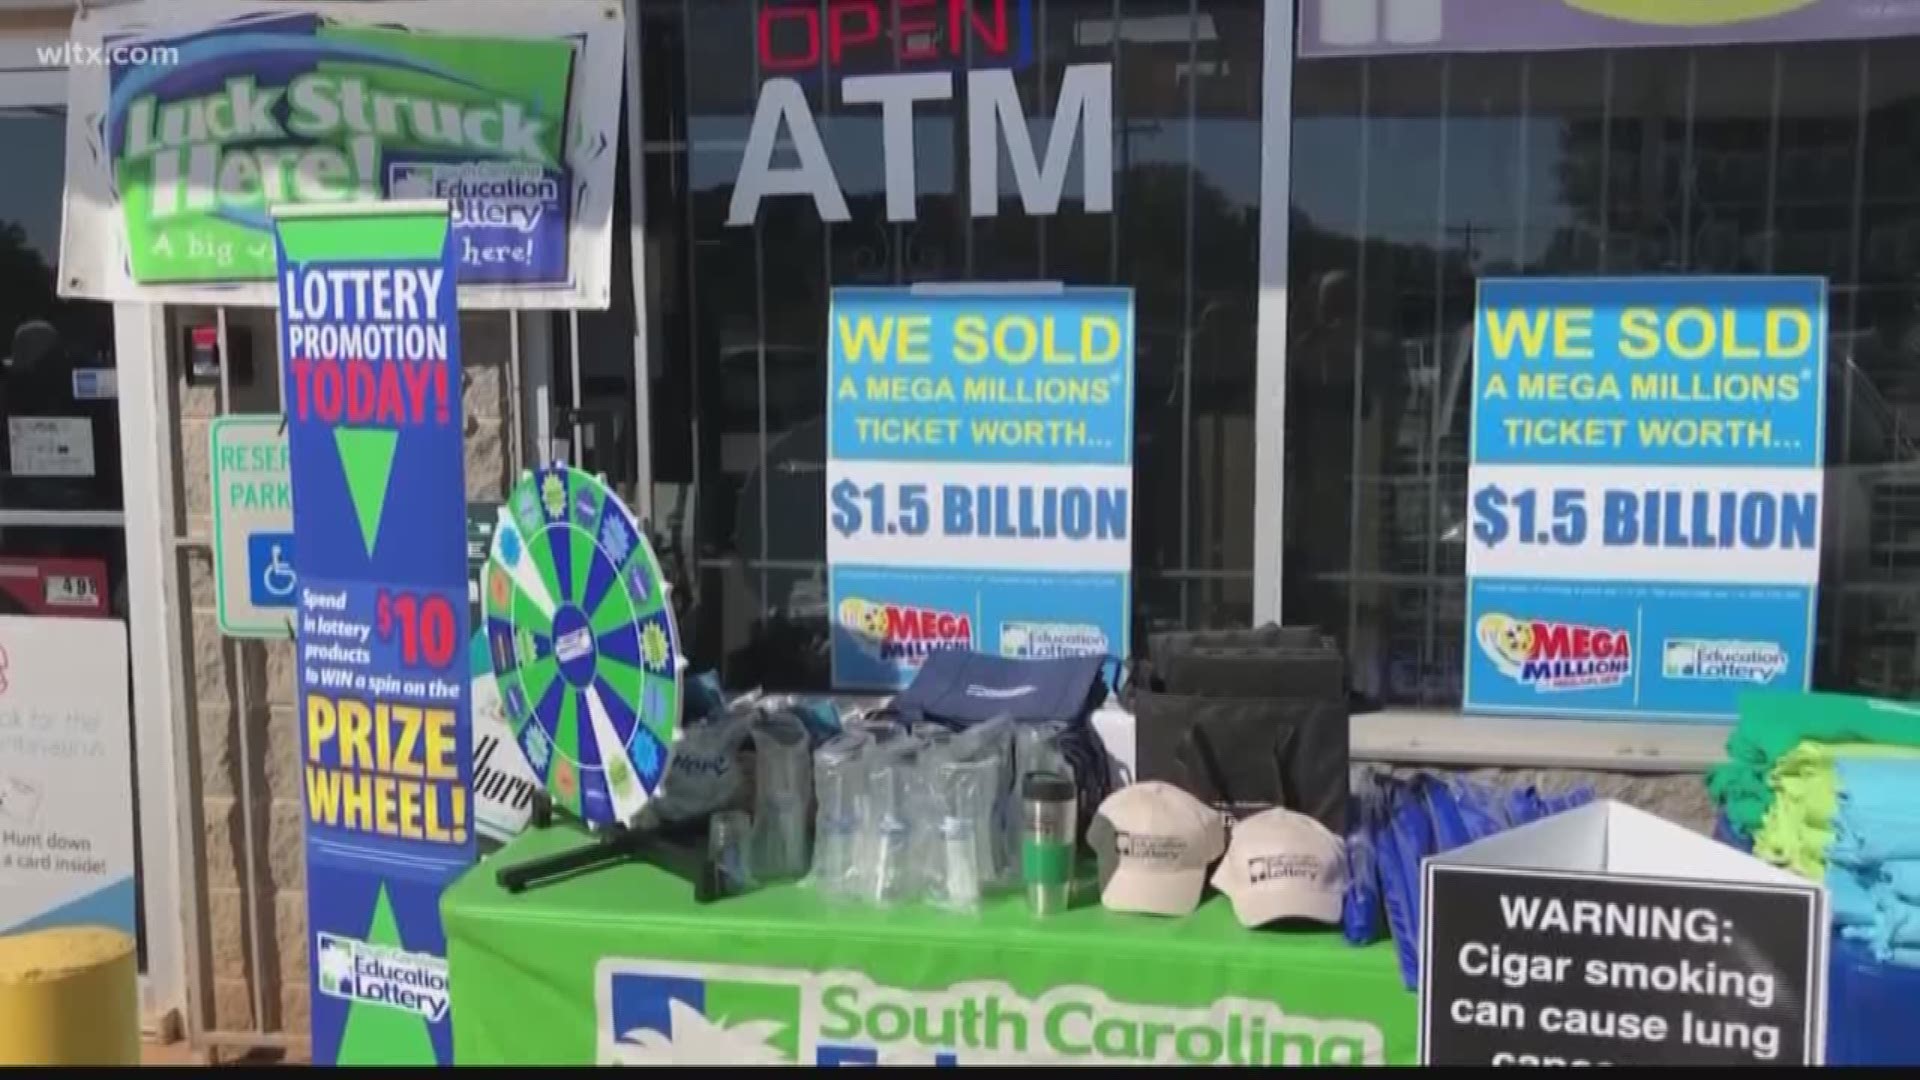 The South Carolina lottery says a single winner has stepped forward to claim the $1.5 billion Jackpot from a drawing last October.